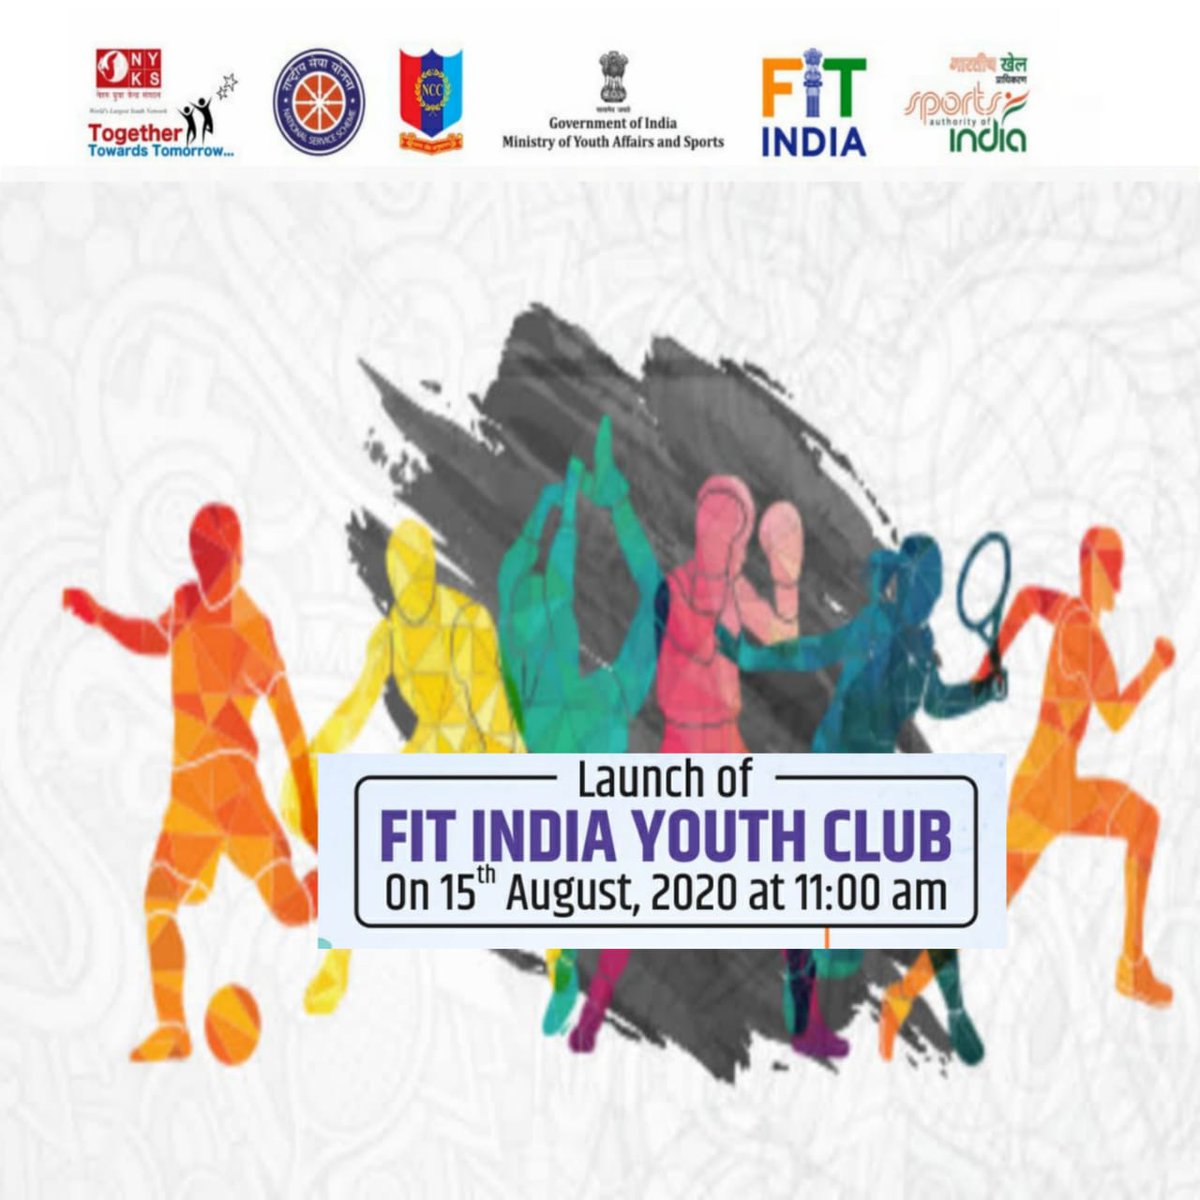 Nehru Yuva Kendra Theni Tamilnadu Launch Of Fit India Youth Club Day 15th August Time 11 Am Watch The Live Launch T Co Sz1n7ebpuy Newindiafitindia Fitindia Fitindiayouthclub Nyk Theni